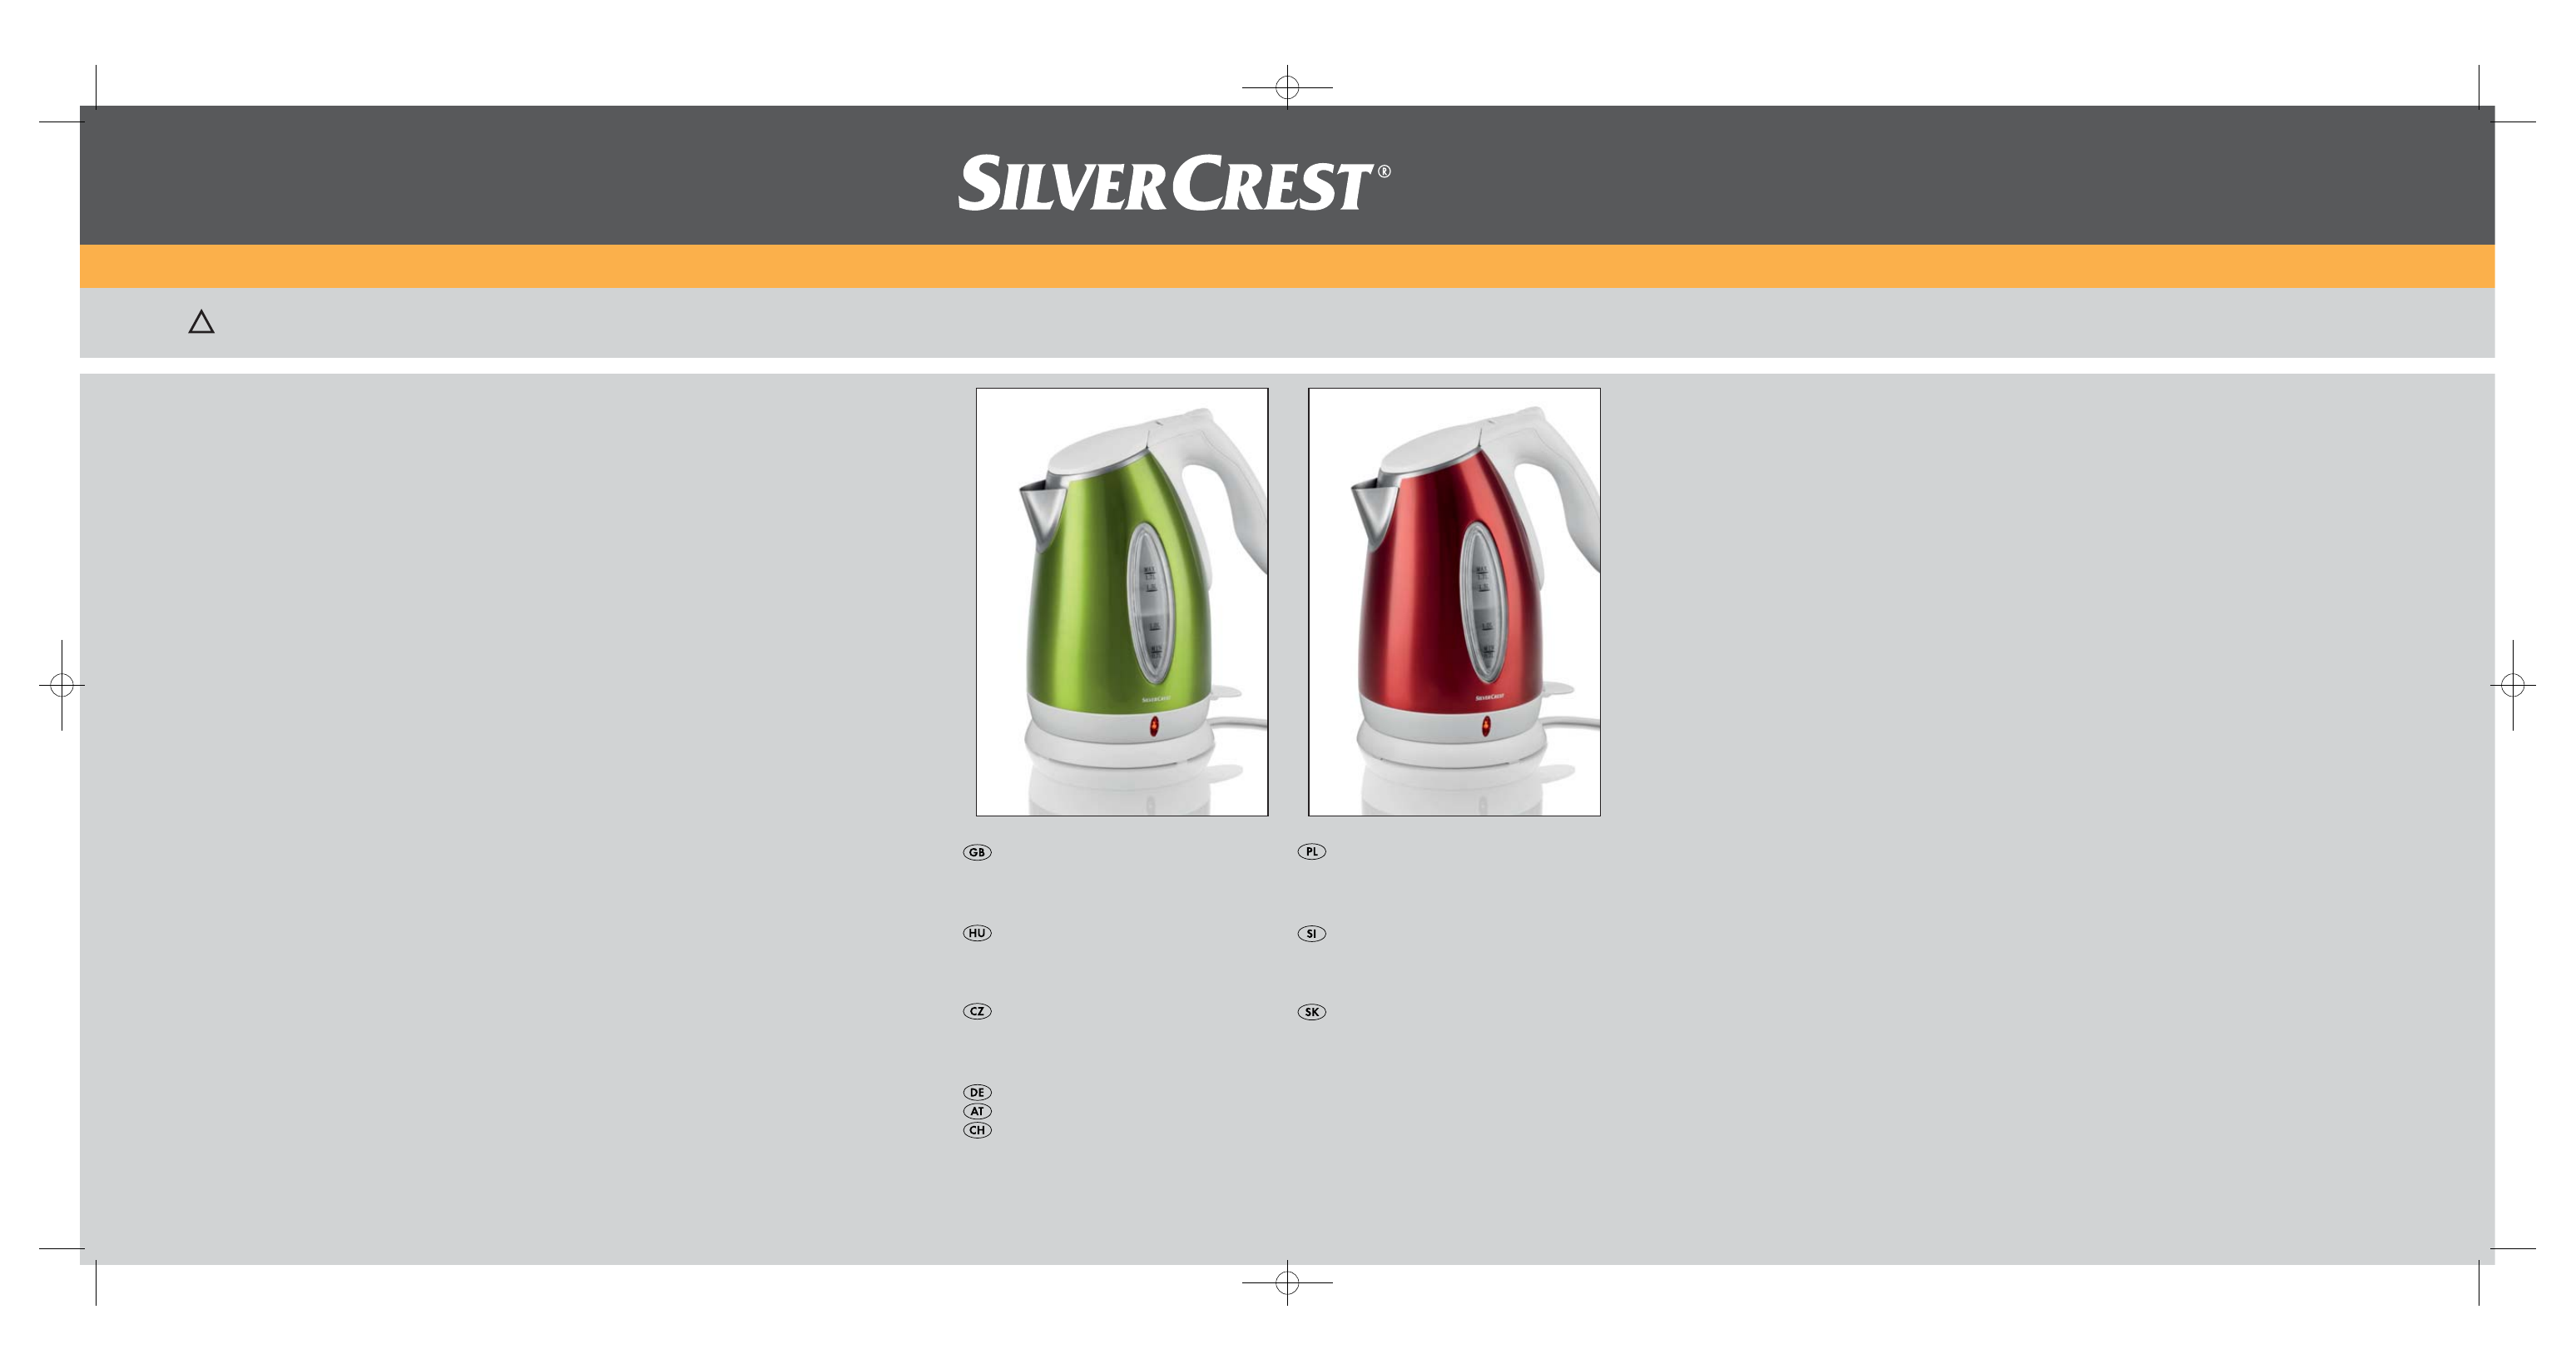 Silvercrest SWKS 2400 B1 User Manual | 43 pages | Also for: SWKS 2400 A1